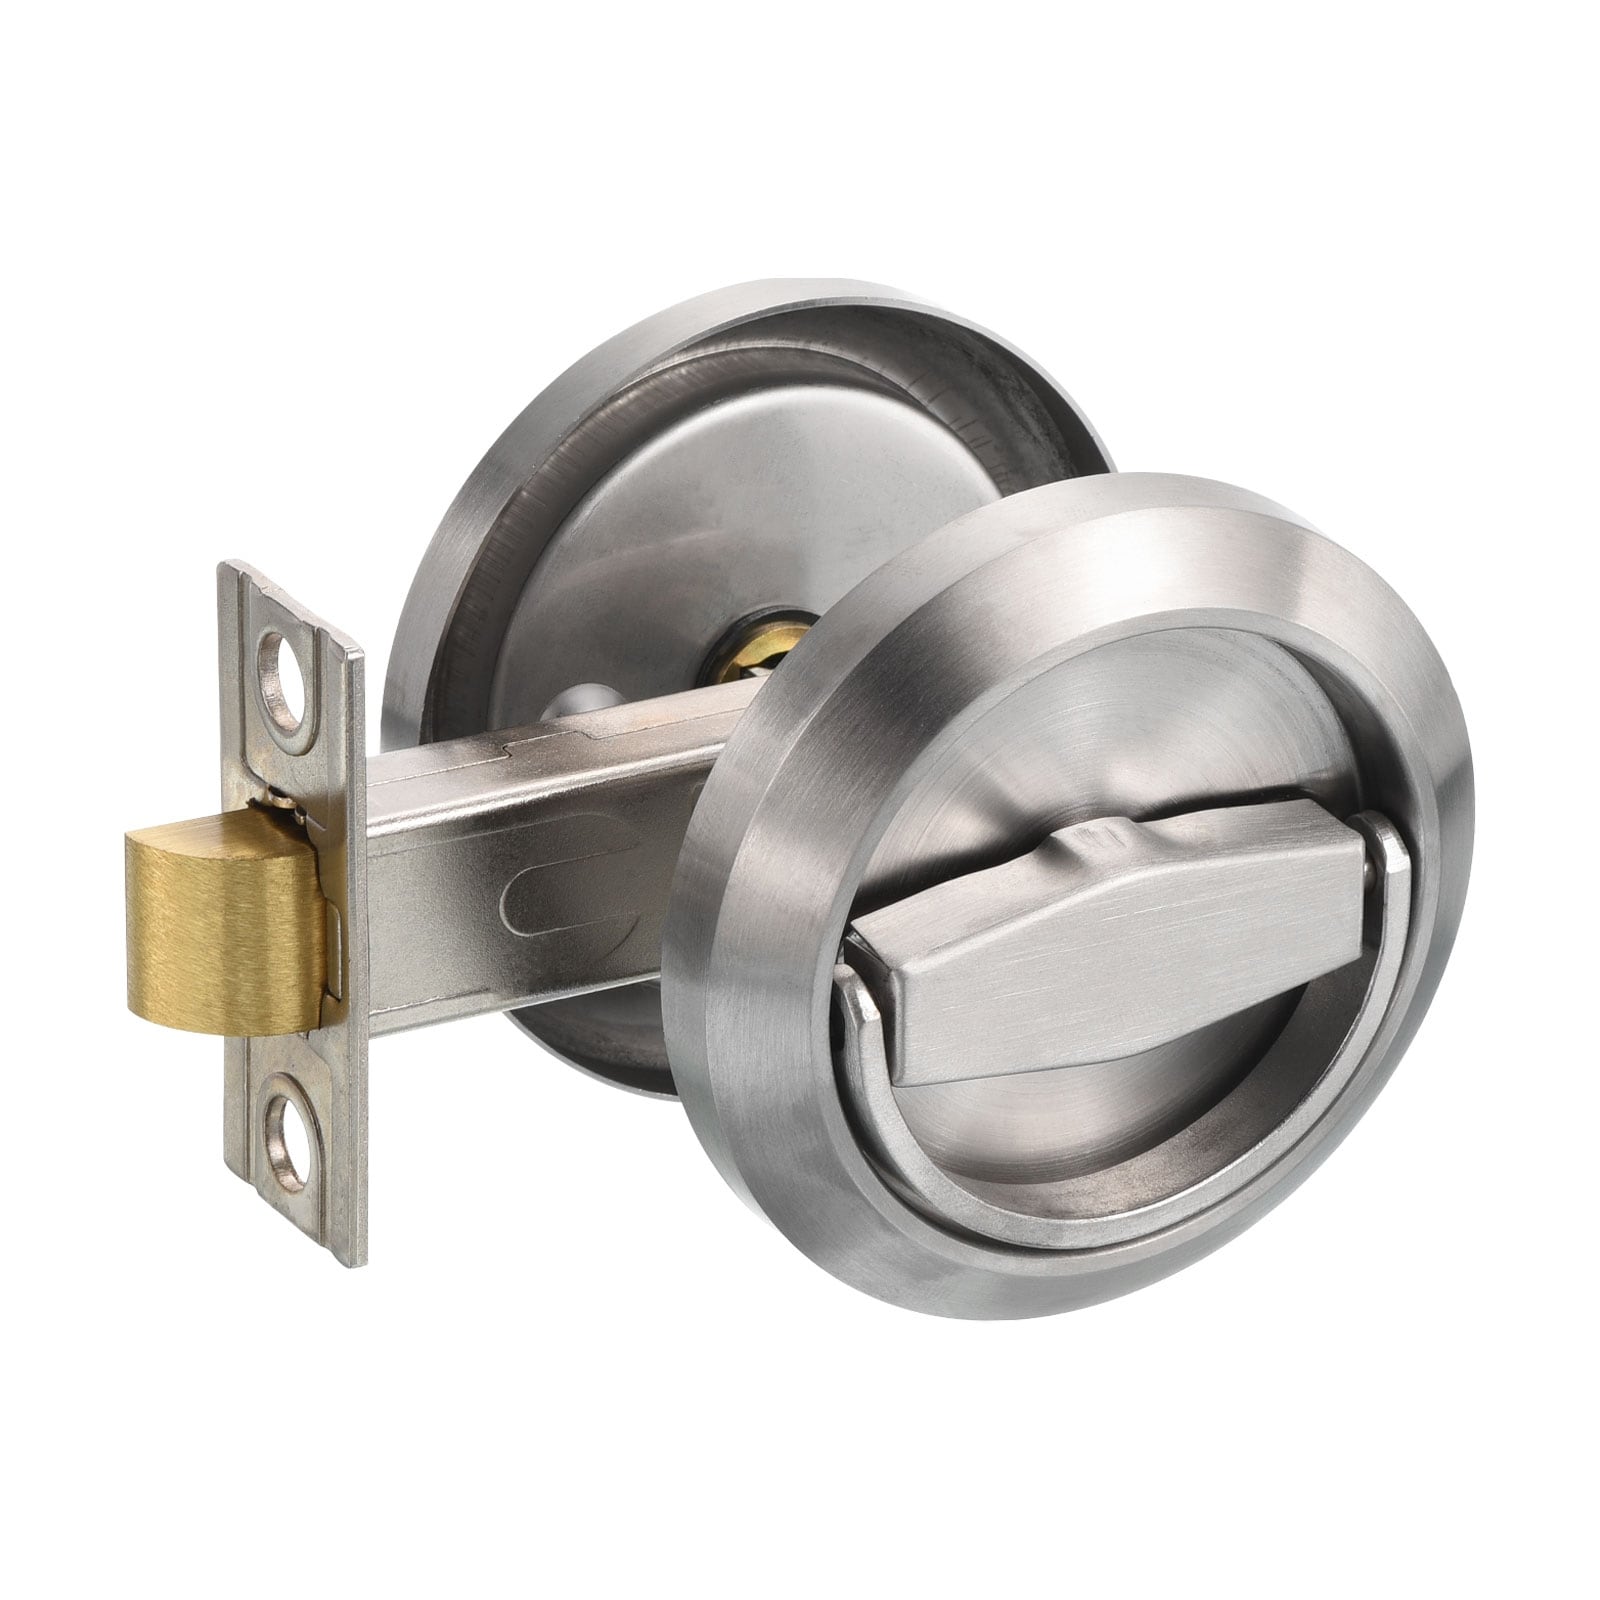 https://ak1.ostkcdn.com/images/products/is/images/direct/b326c8c1914ff813541e009ec58d973ac365b782/Stainless-Steel-304-Round-Recessed-Door-Lock-Hidden-Cup-Pulls-Knob-Silver.jpg